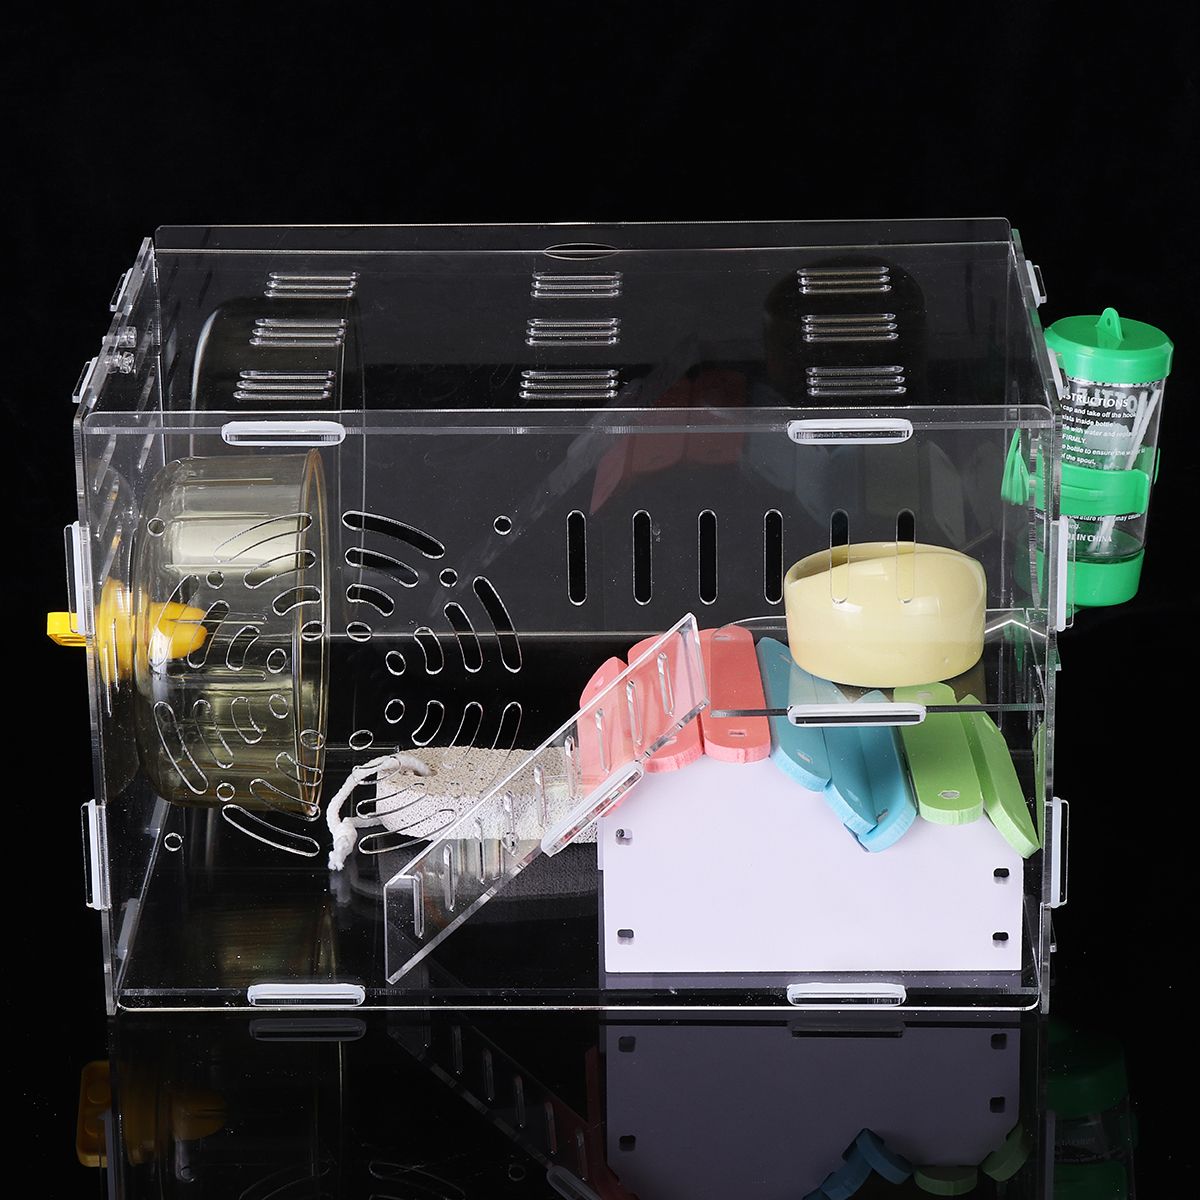 Hamster-Acrylic-Cage-Clear-1-Layer-Mice-Mouse-Castle-Rat-House-Toy-Pet-Bed-Kids-Gift-1532846